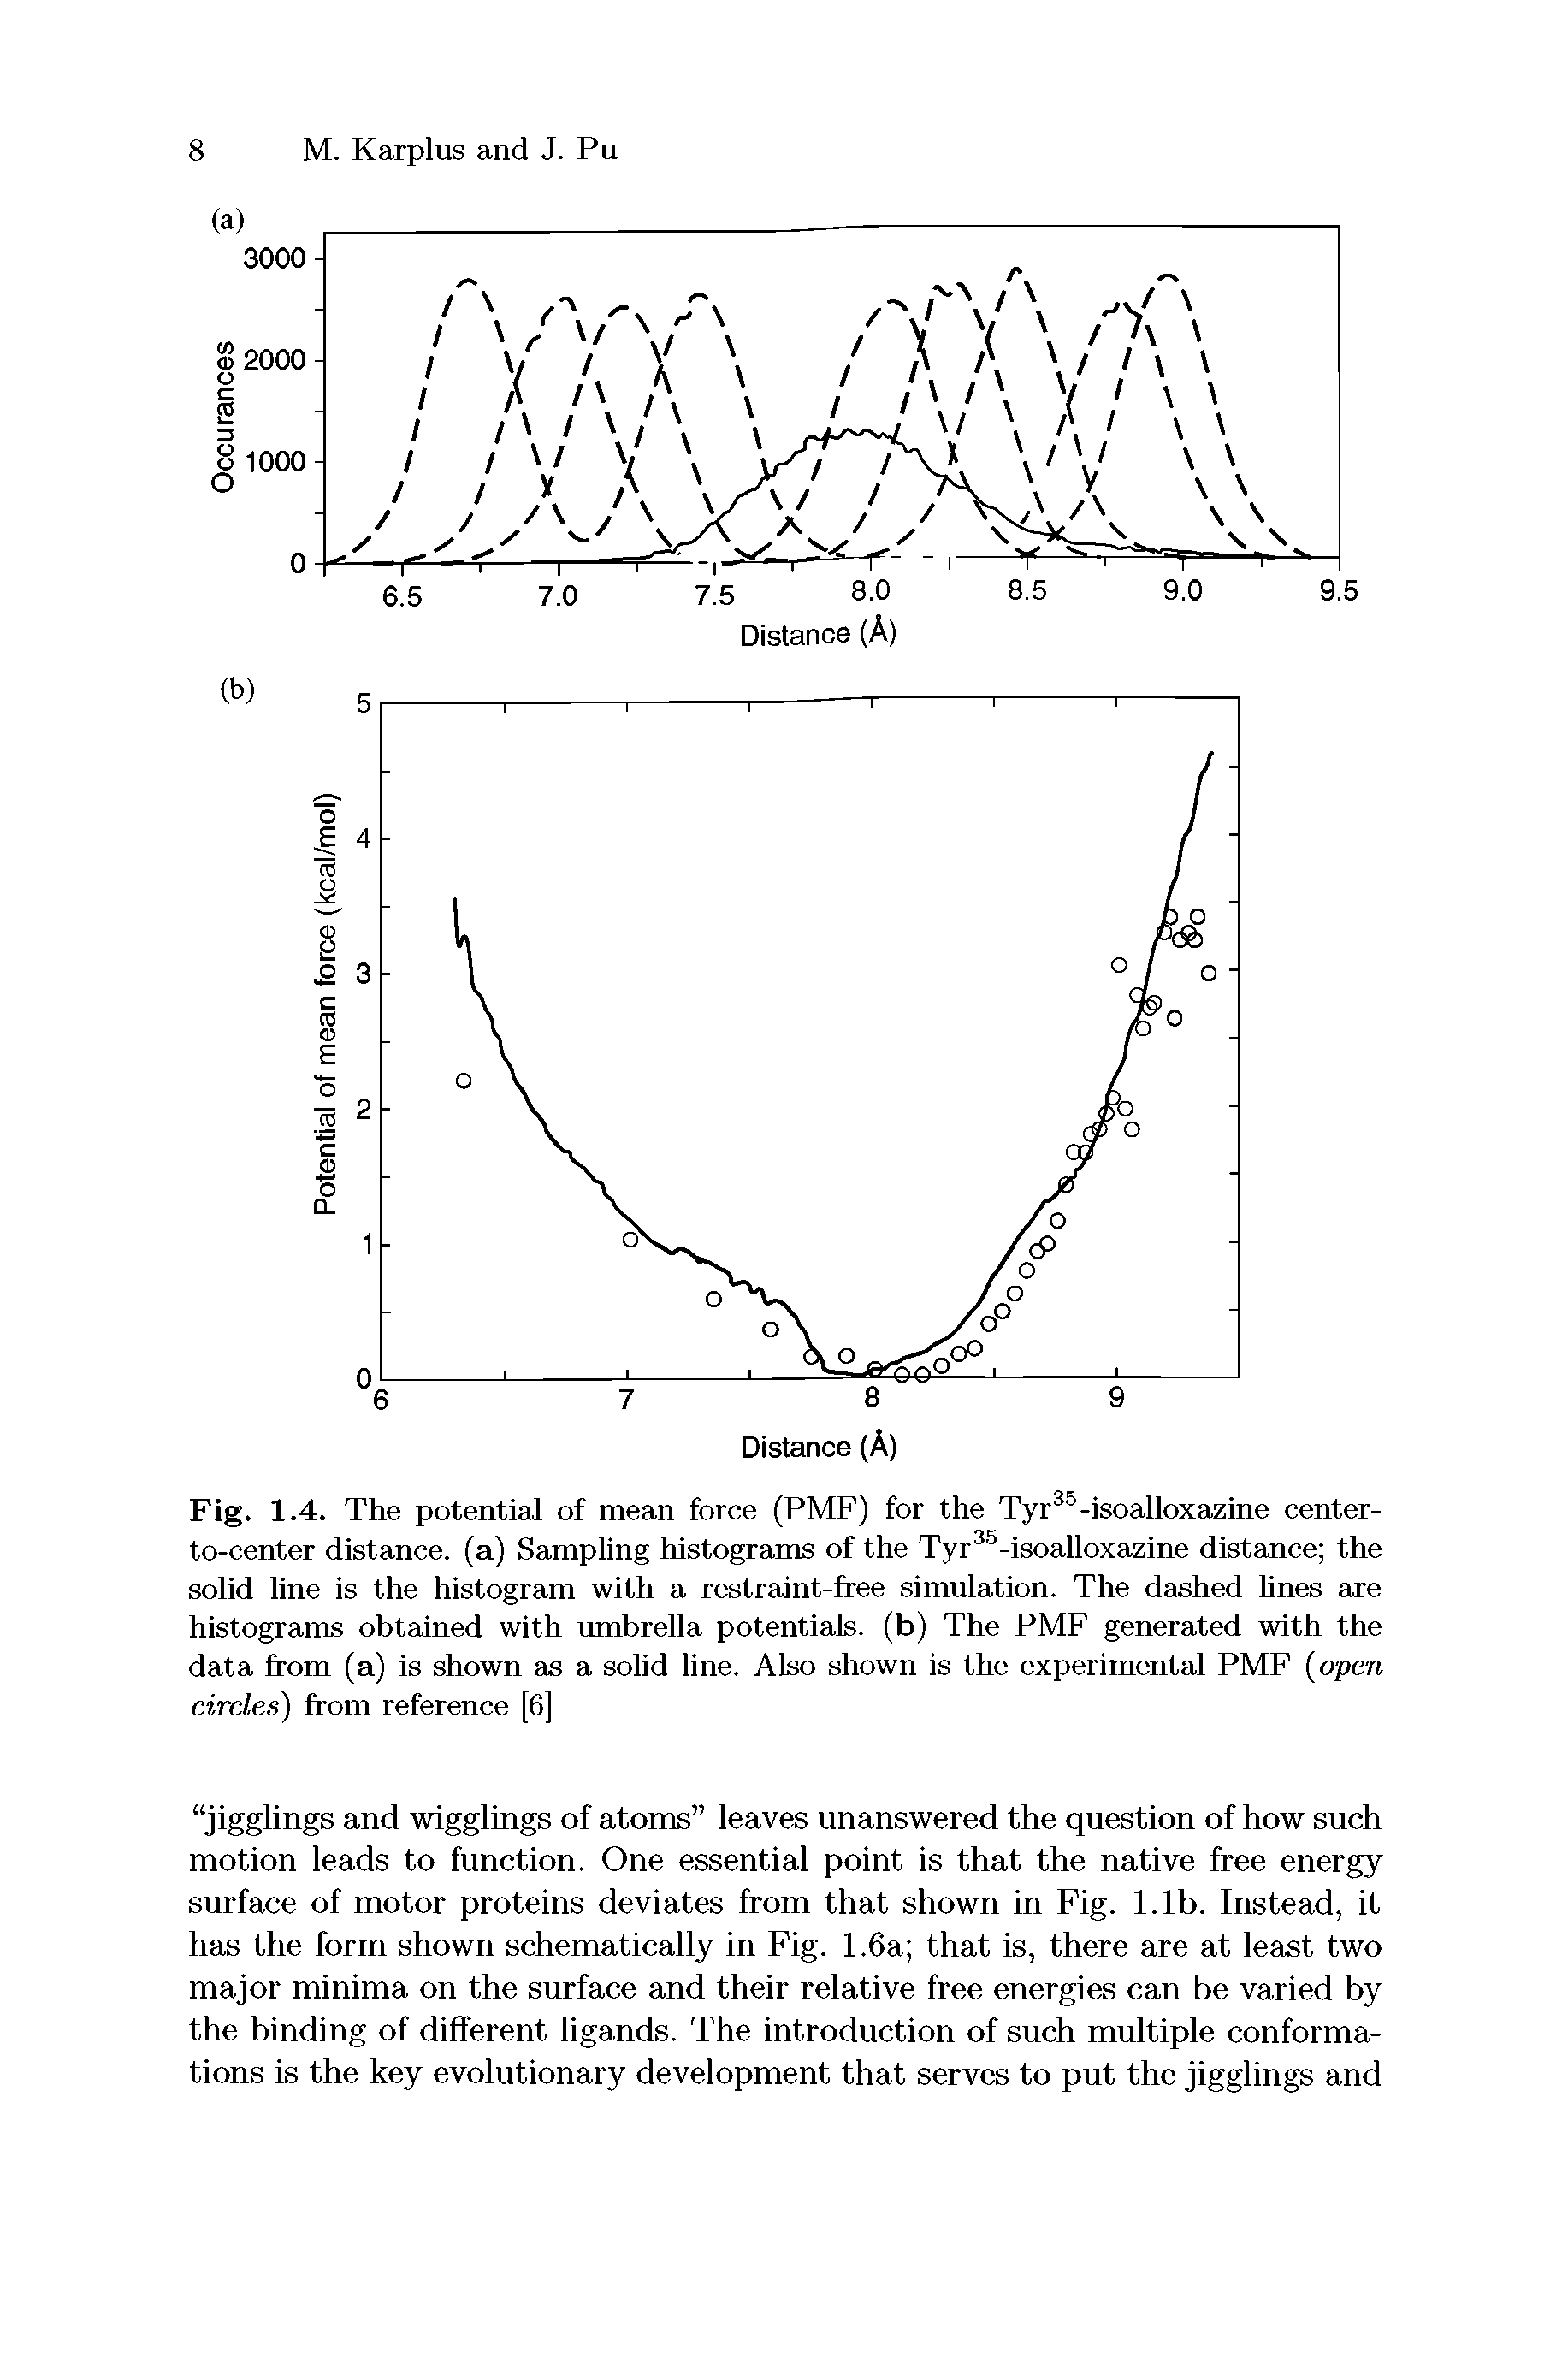 Fig. 1.4. The potential of mean force (PMF) for the Tyr -isoalloxazine center-to-center distance, (a) Sampling histograms of the Tyr -isoalloxazine distance the solid line is the histogram with a restraint-free simulation. The dashed hues are histograms obtained with umbrella potentials, (b) The PMF generated with the data from (a) is shown as a solid line. Also shown is the experimental PMF open circles) from reference [6]...